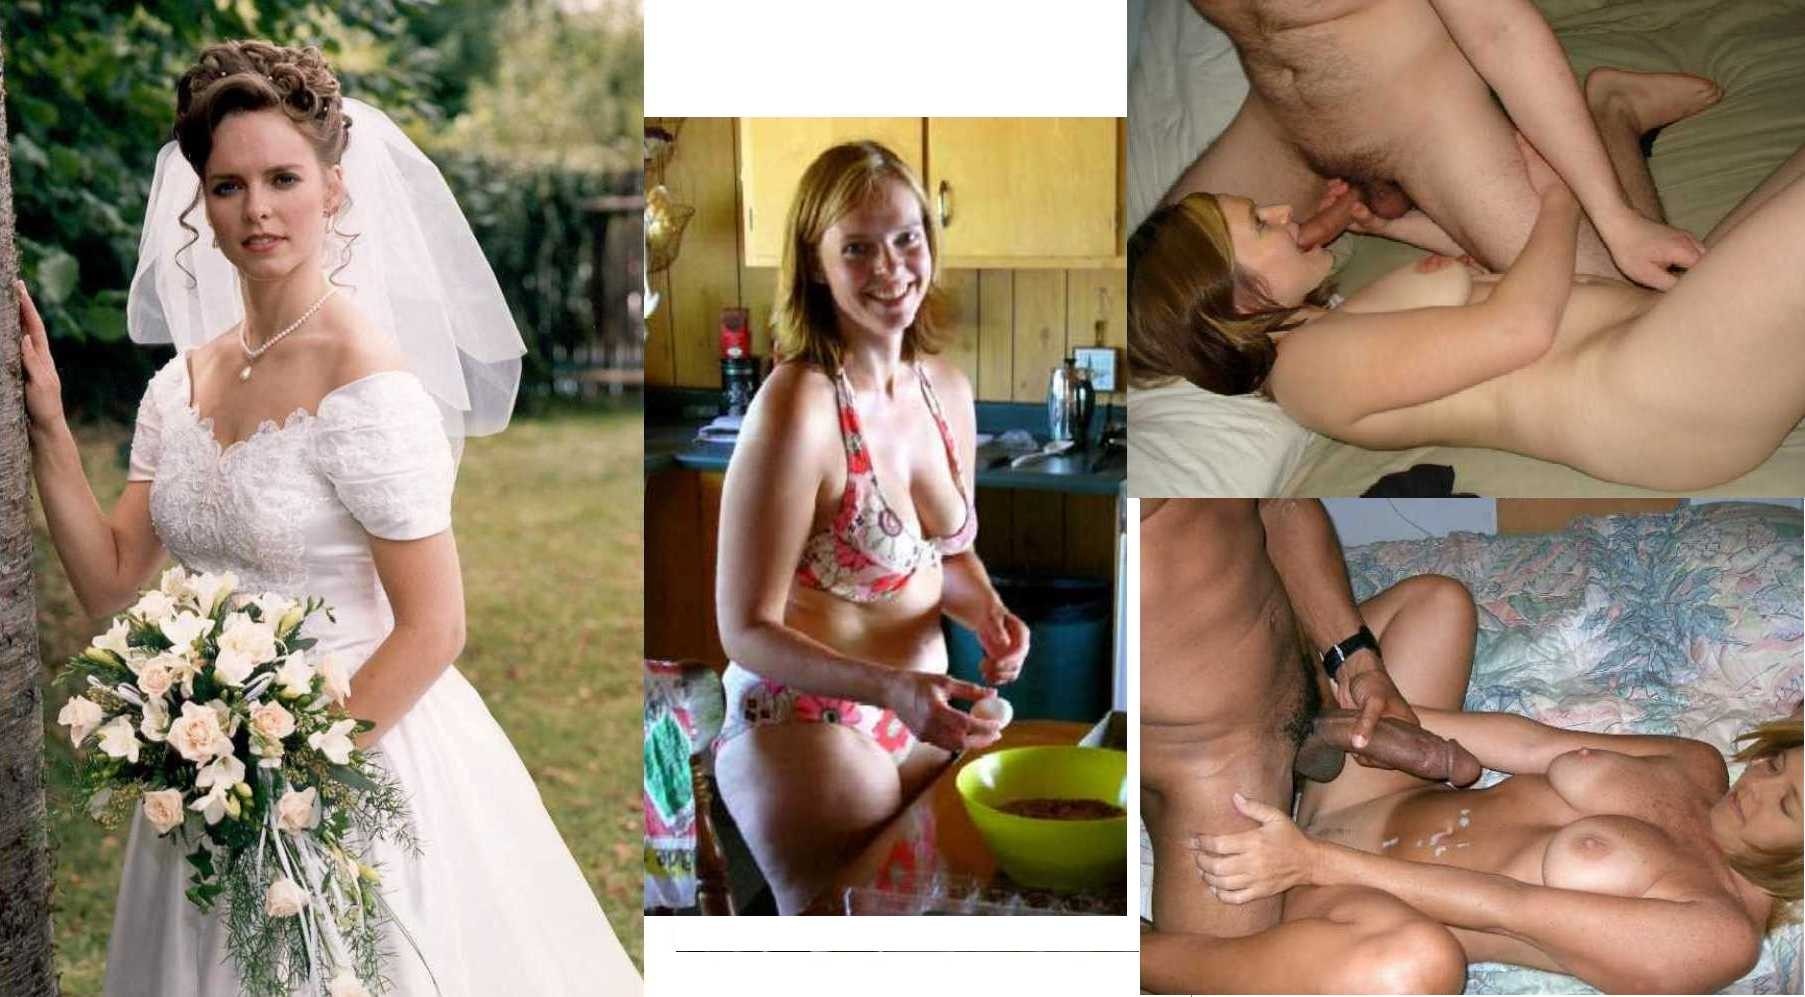 Russian Sex After Marriage (60 photos) photo